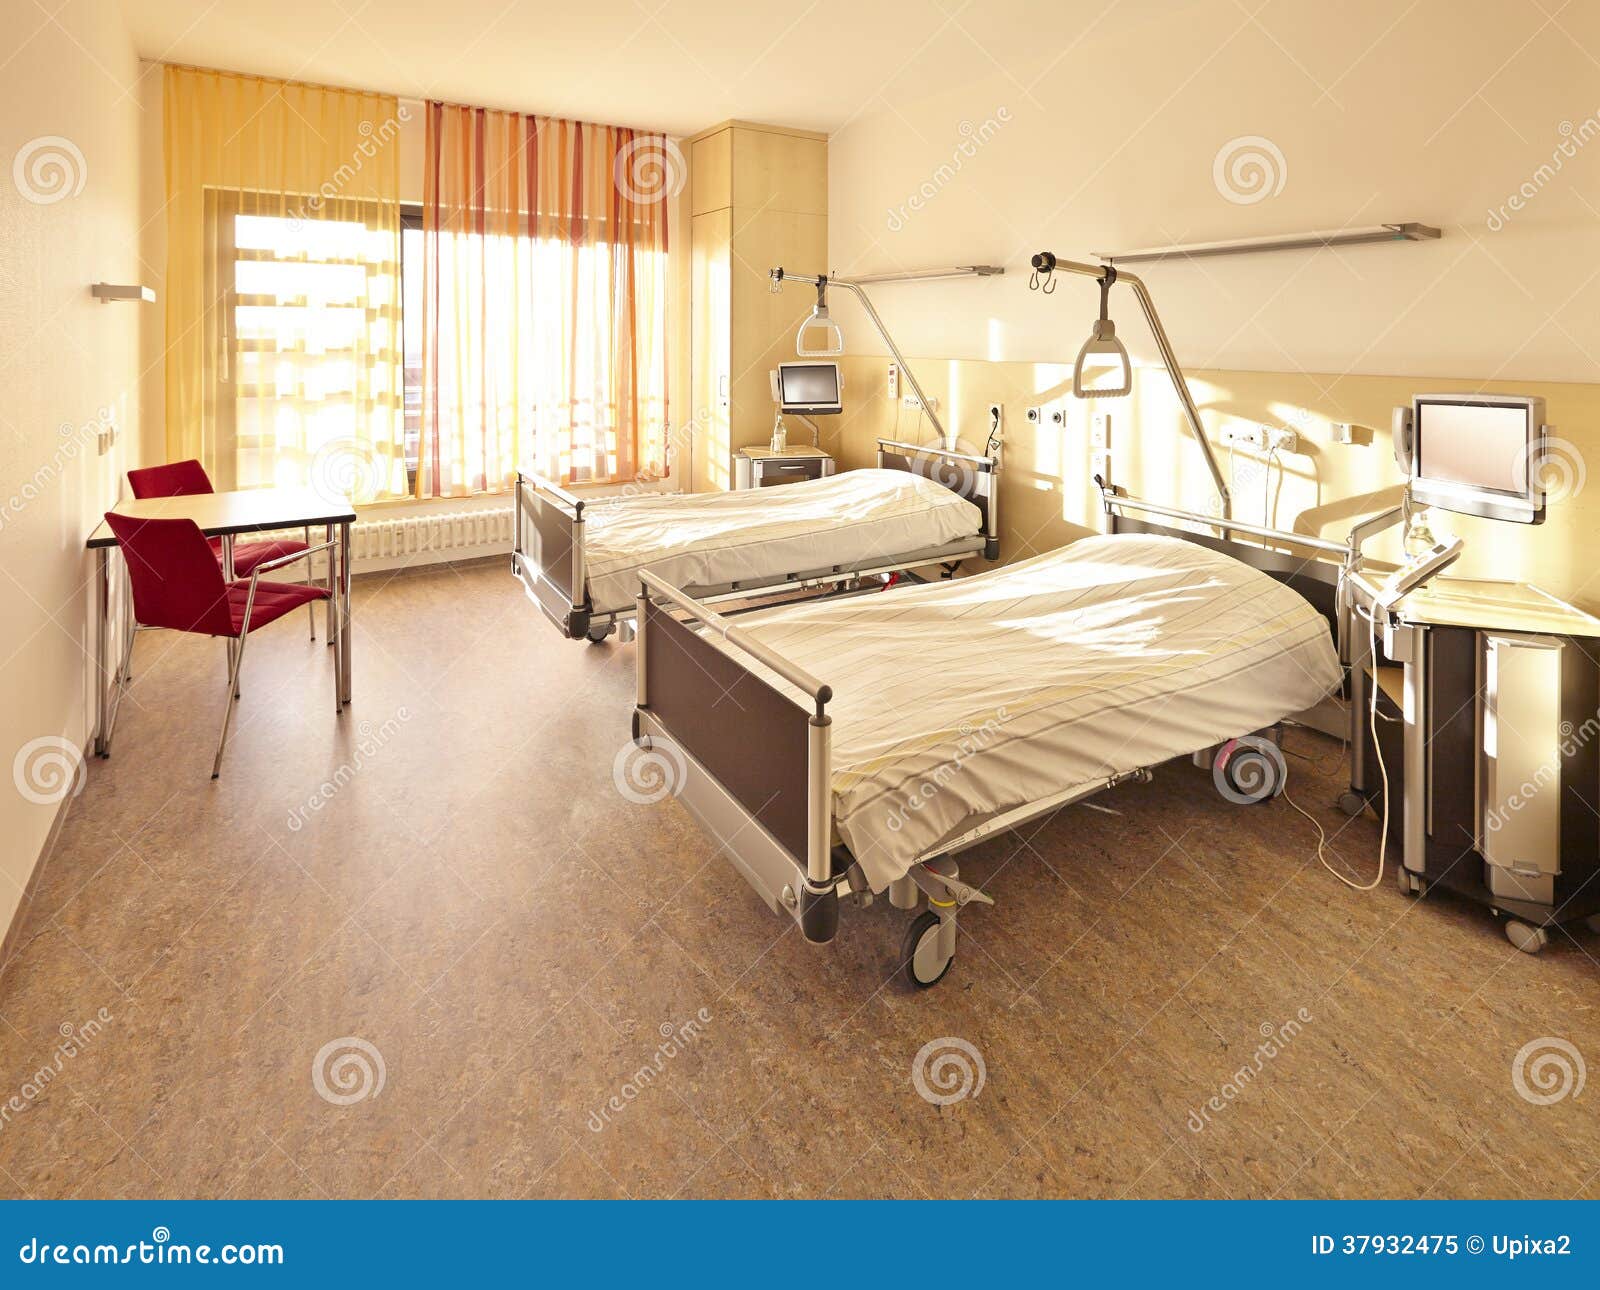 Hospital bed double room stock image. Image of disease ...